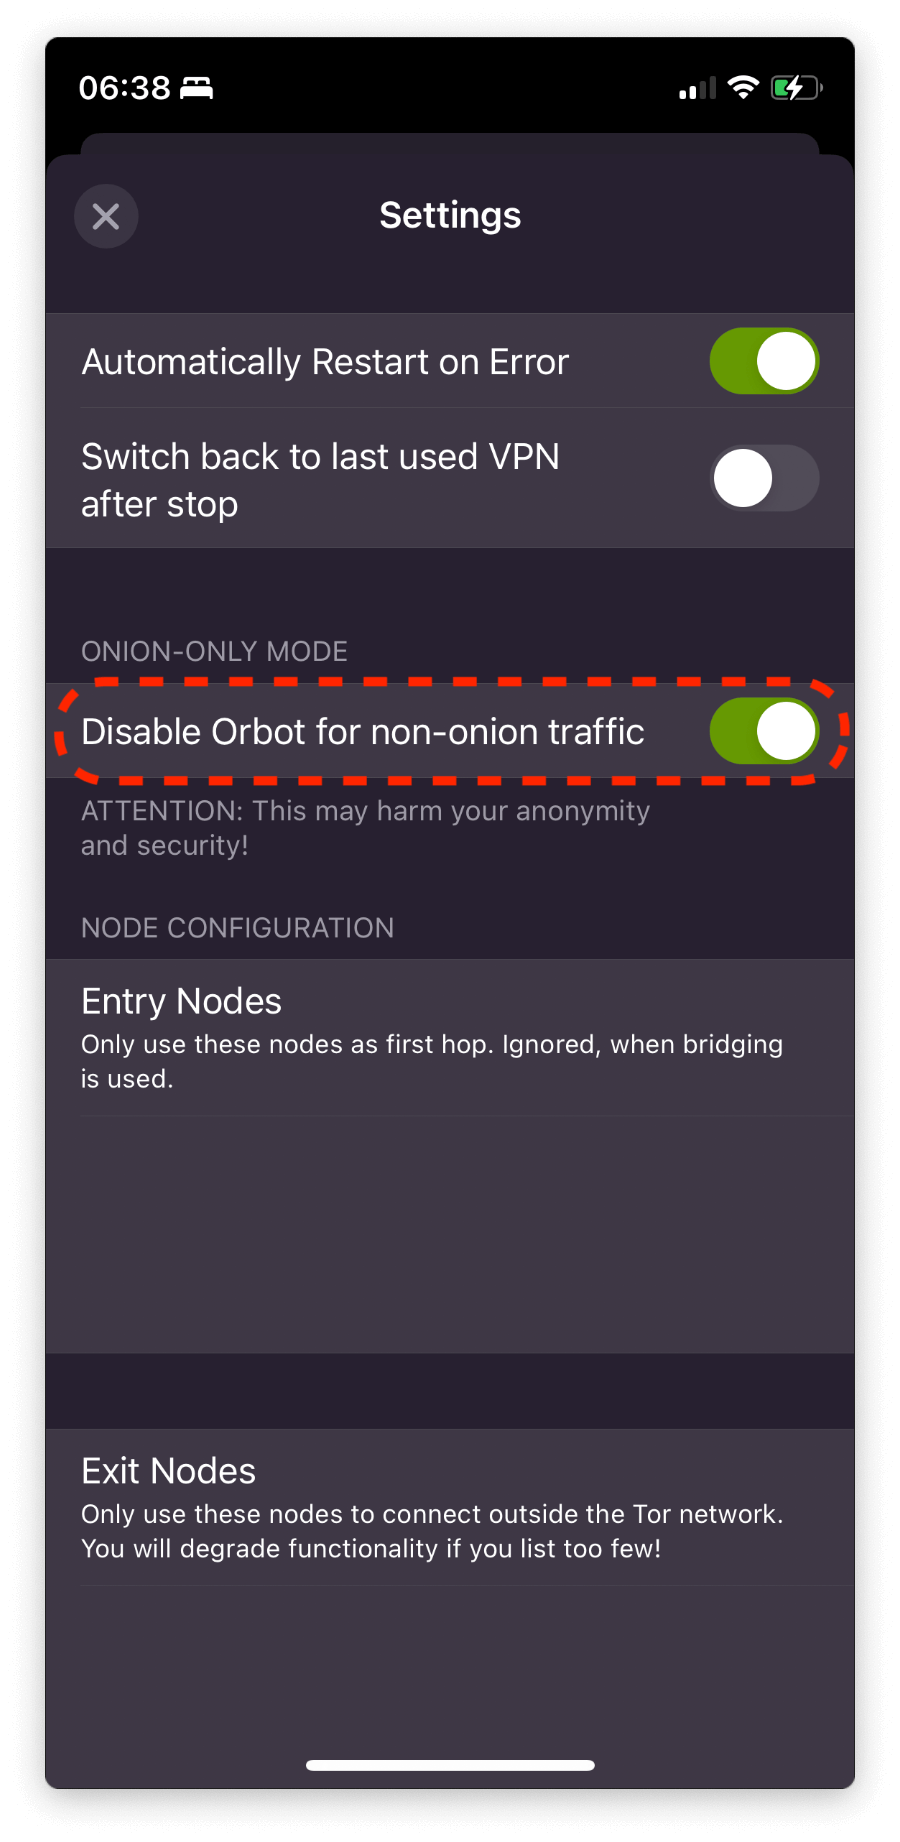 iOS Orbot -> Settings -> Onion-Only Mode